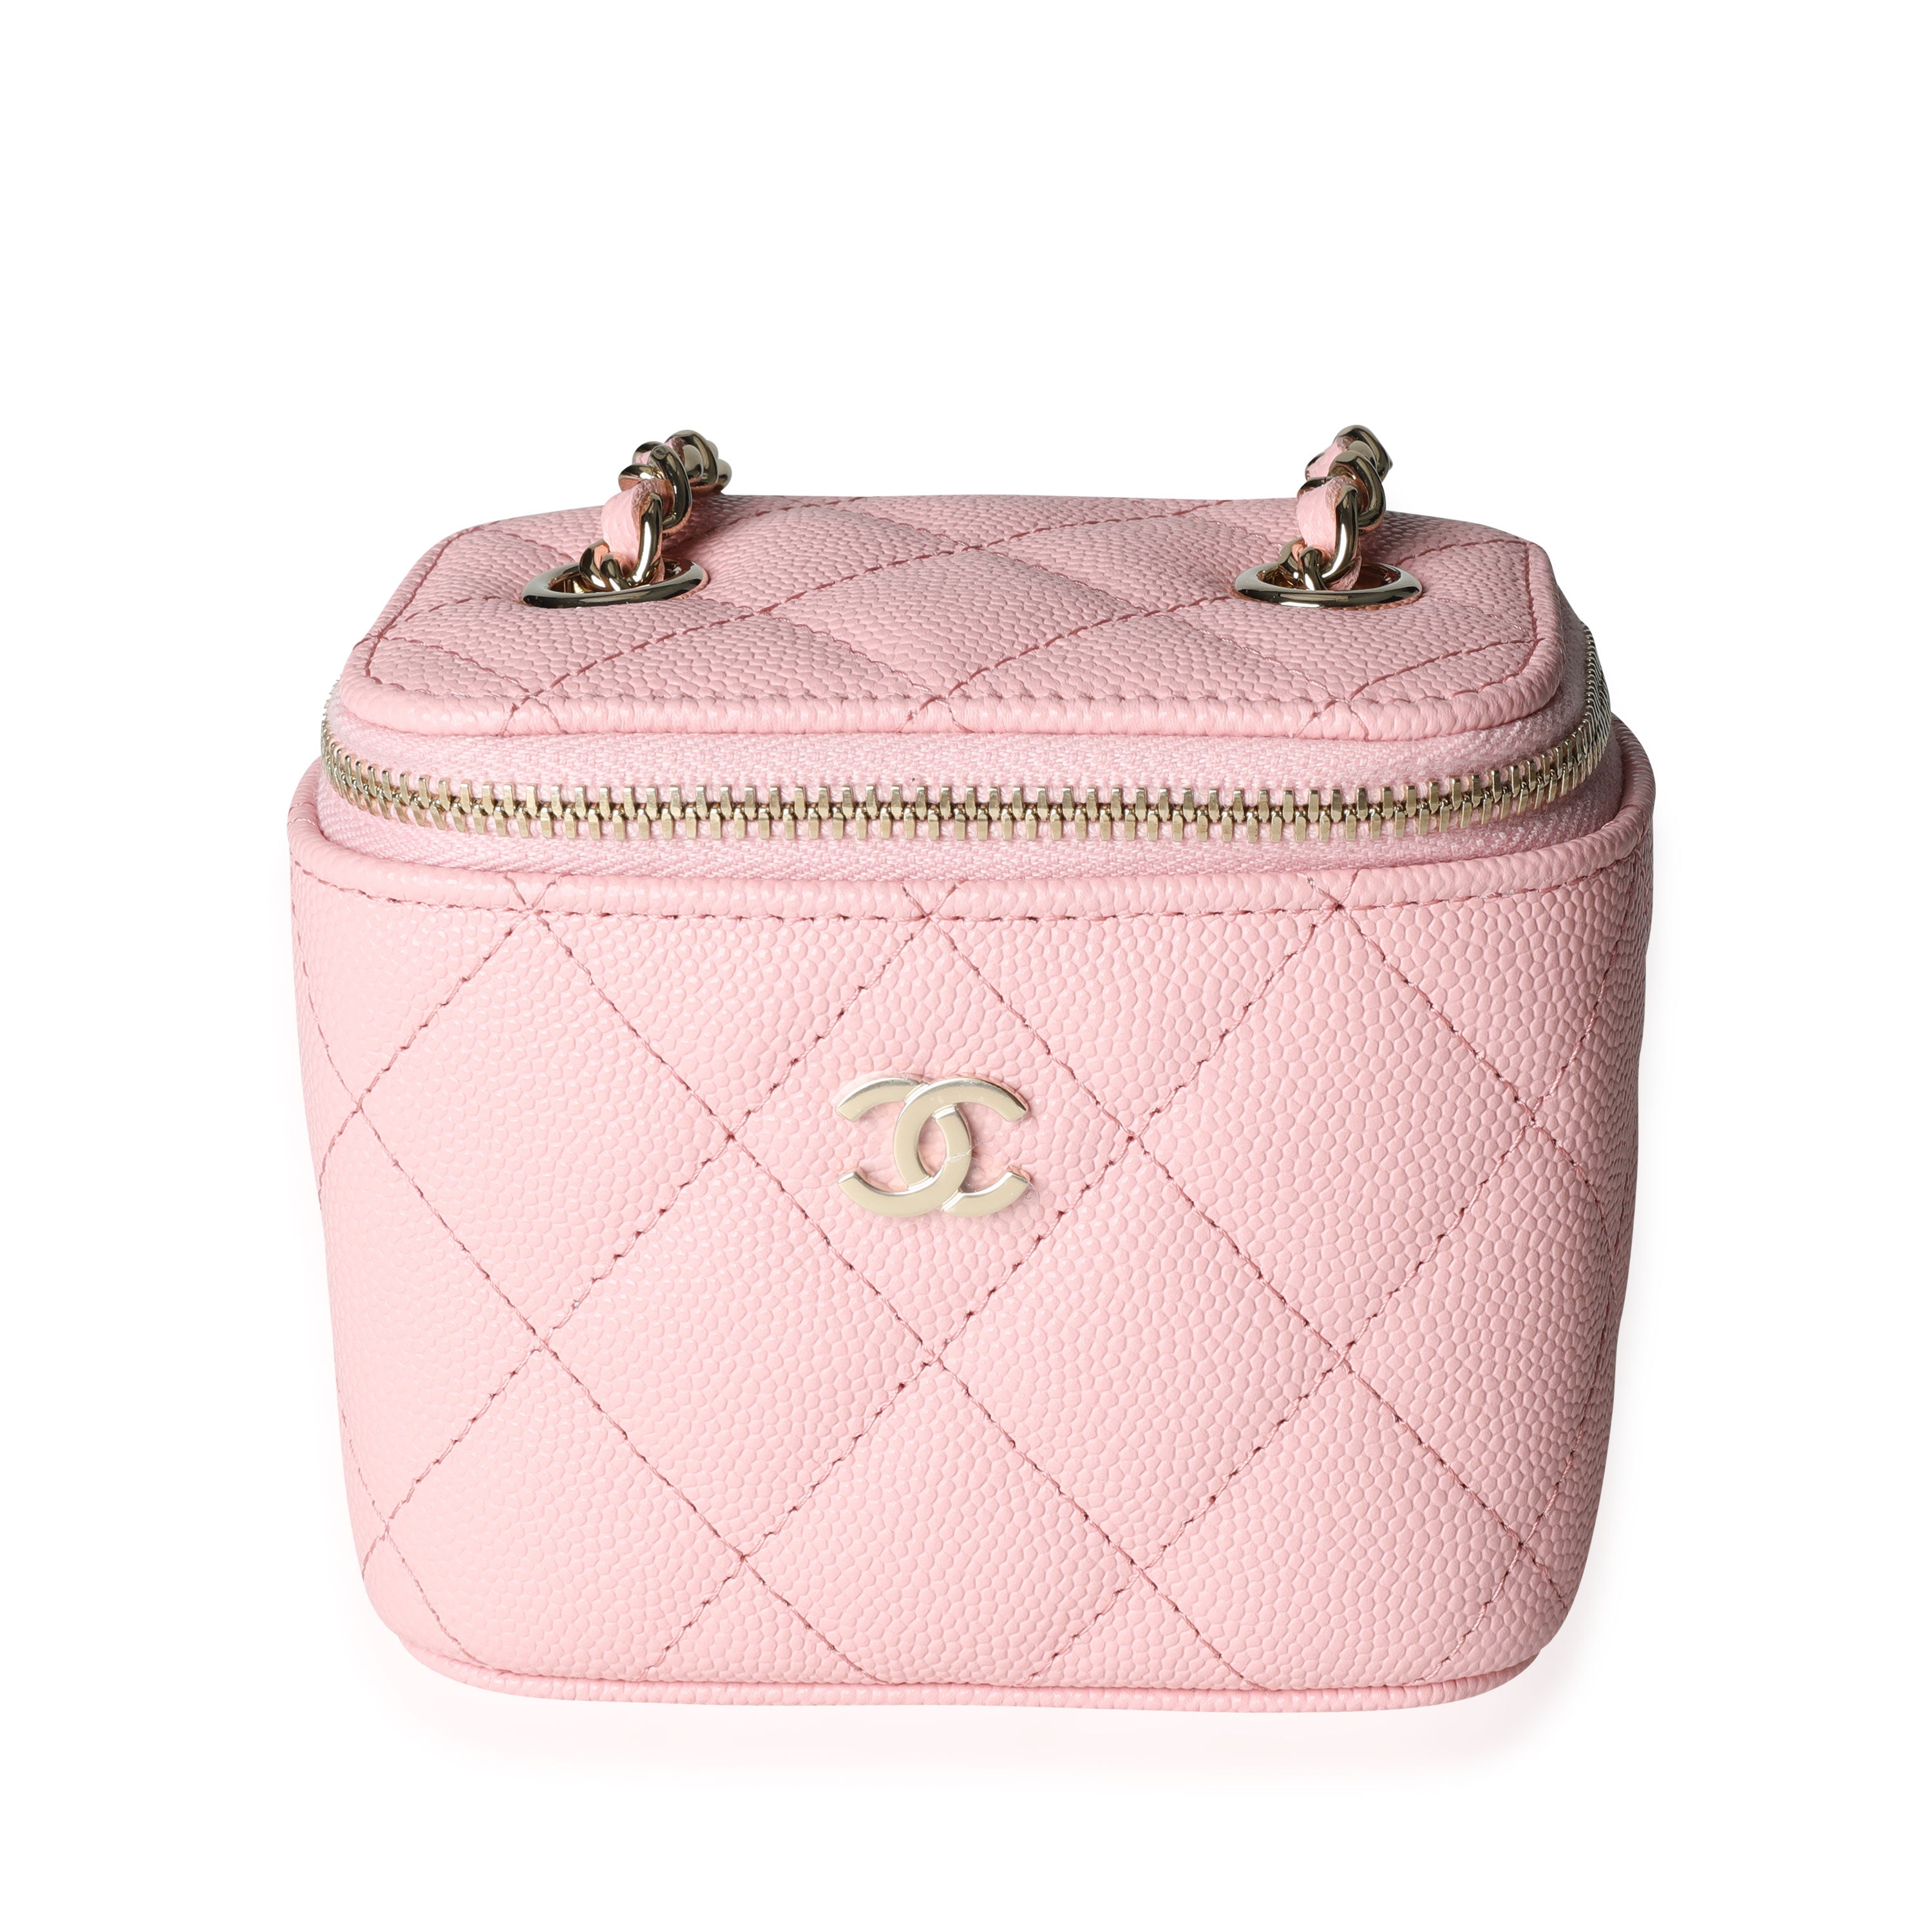 Chanel Pink Quilted Caviar Mini Vanity Case with Chain, myGemma